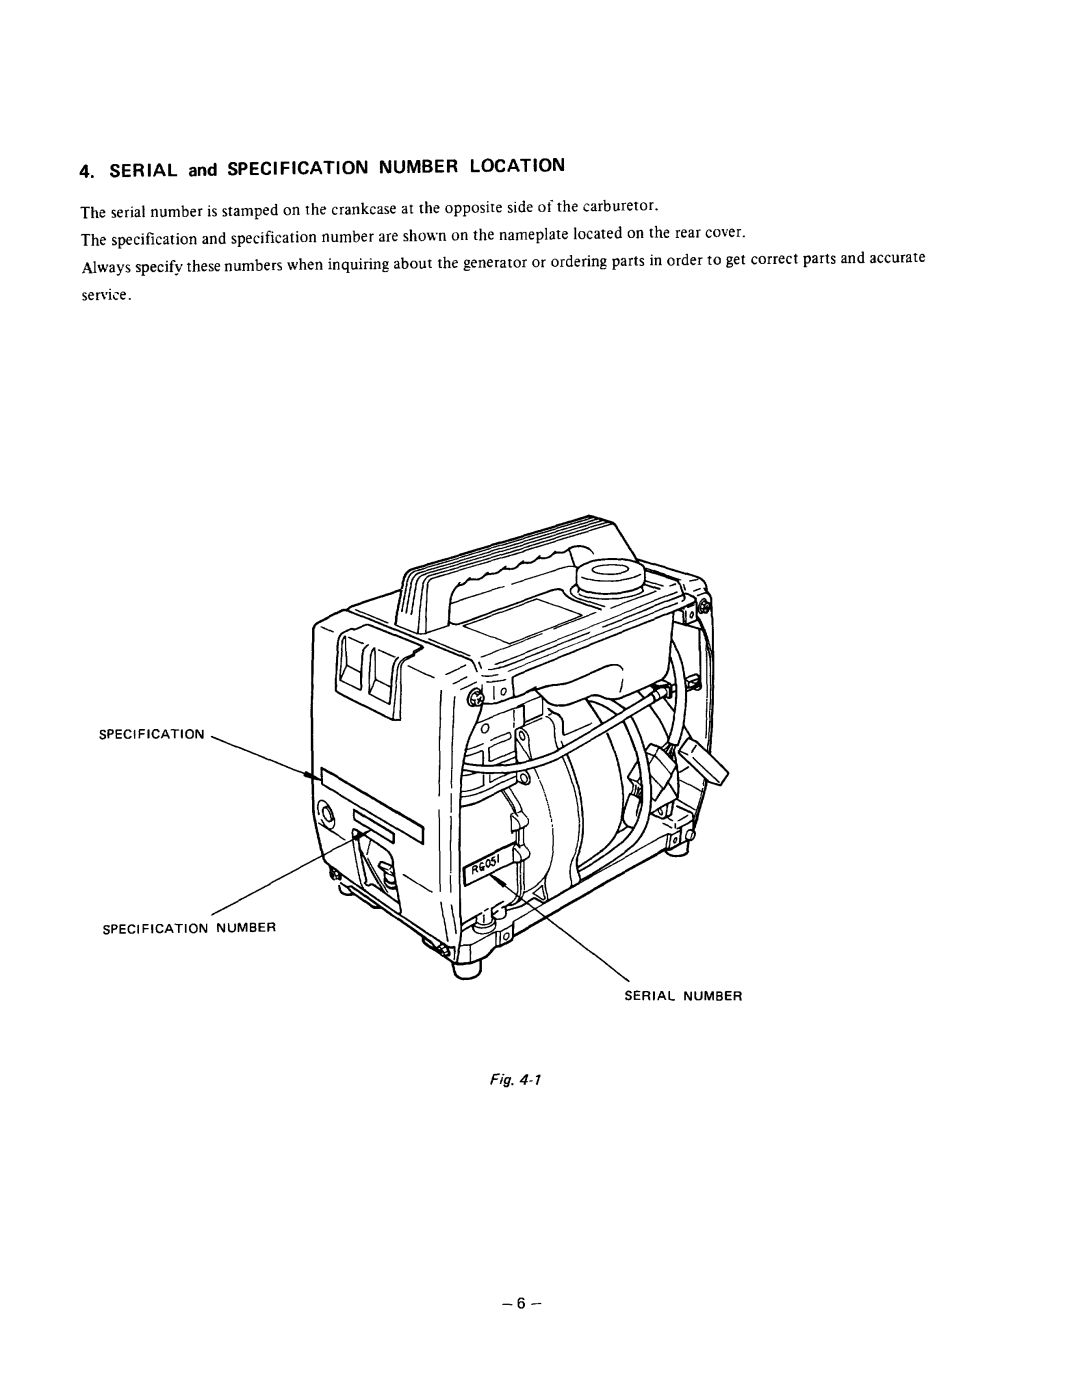 Subaru Robin Power Products R600 manual SERIAL and SPECIFICATION NUMBER LOCATION 